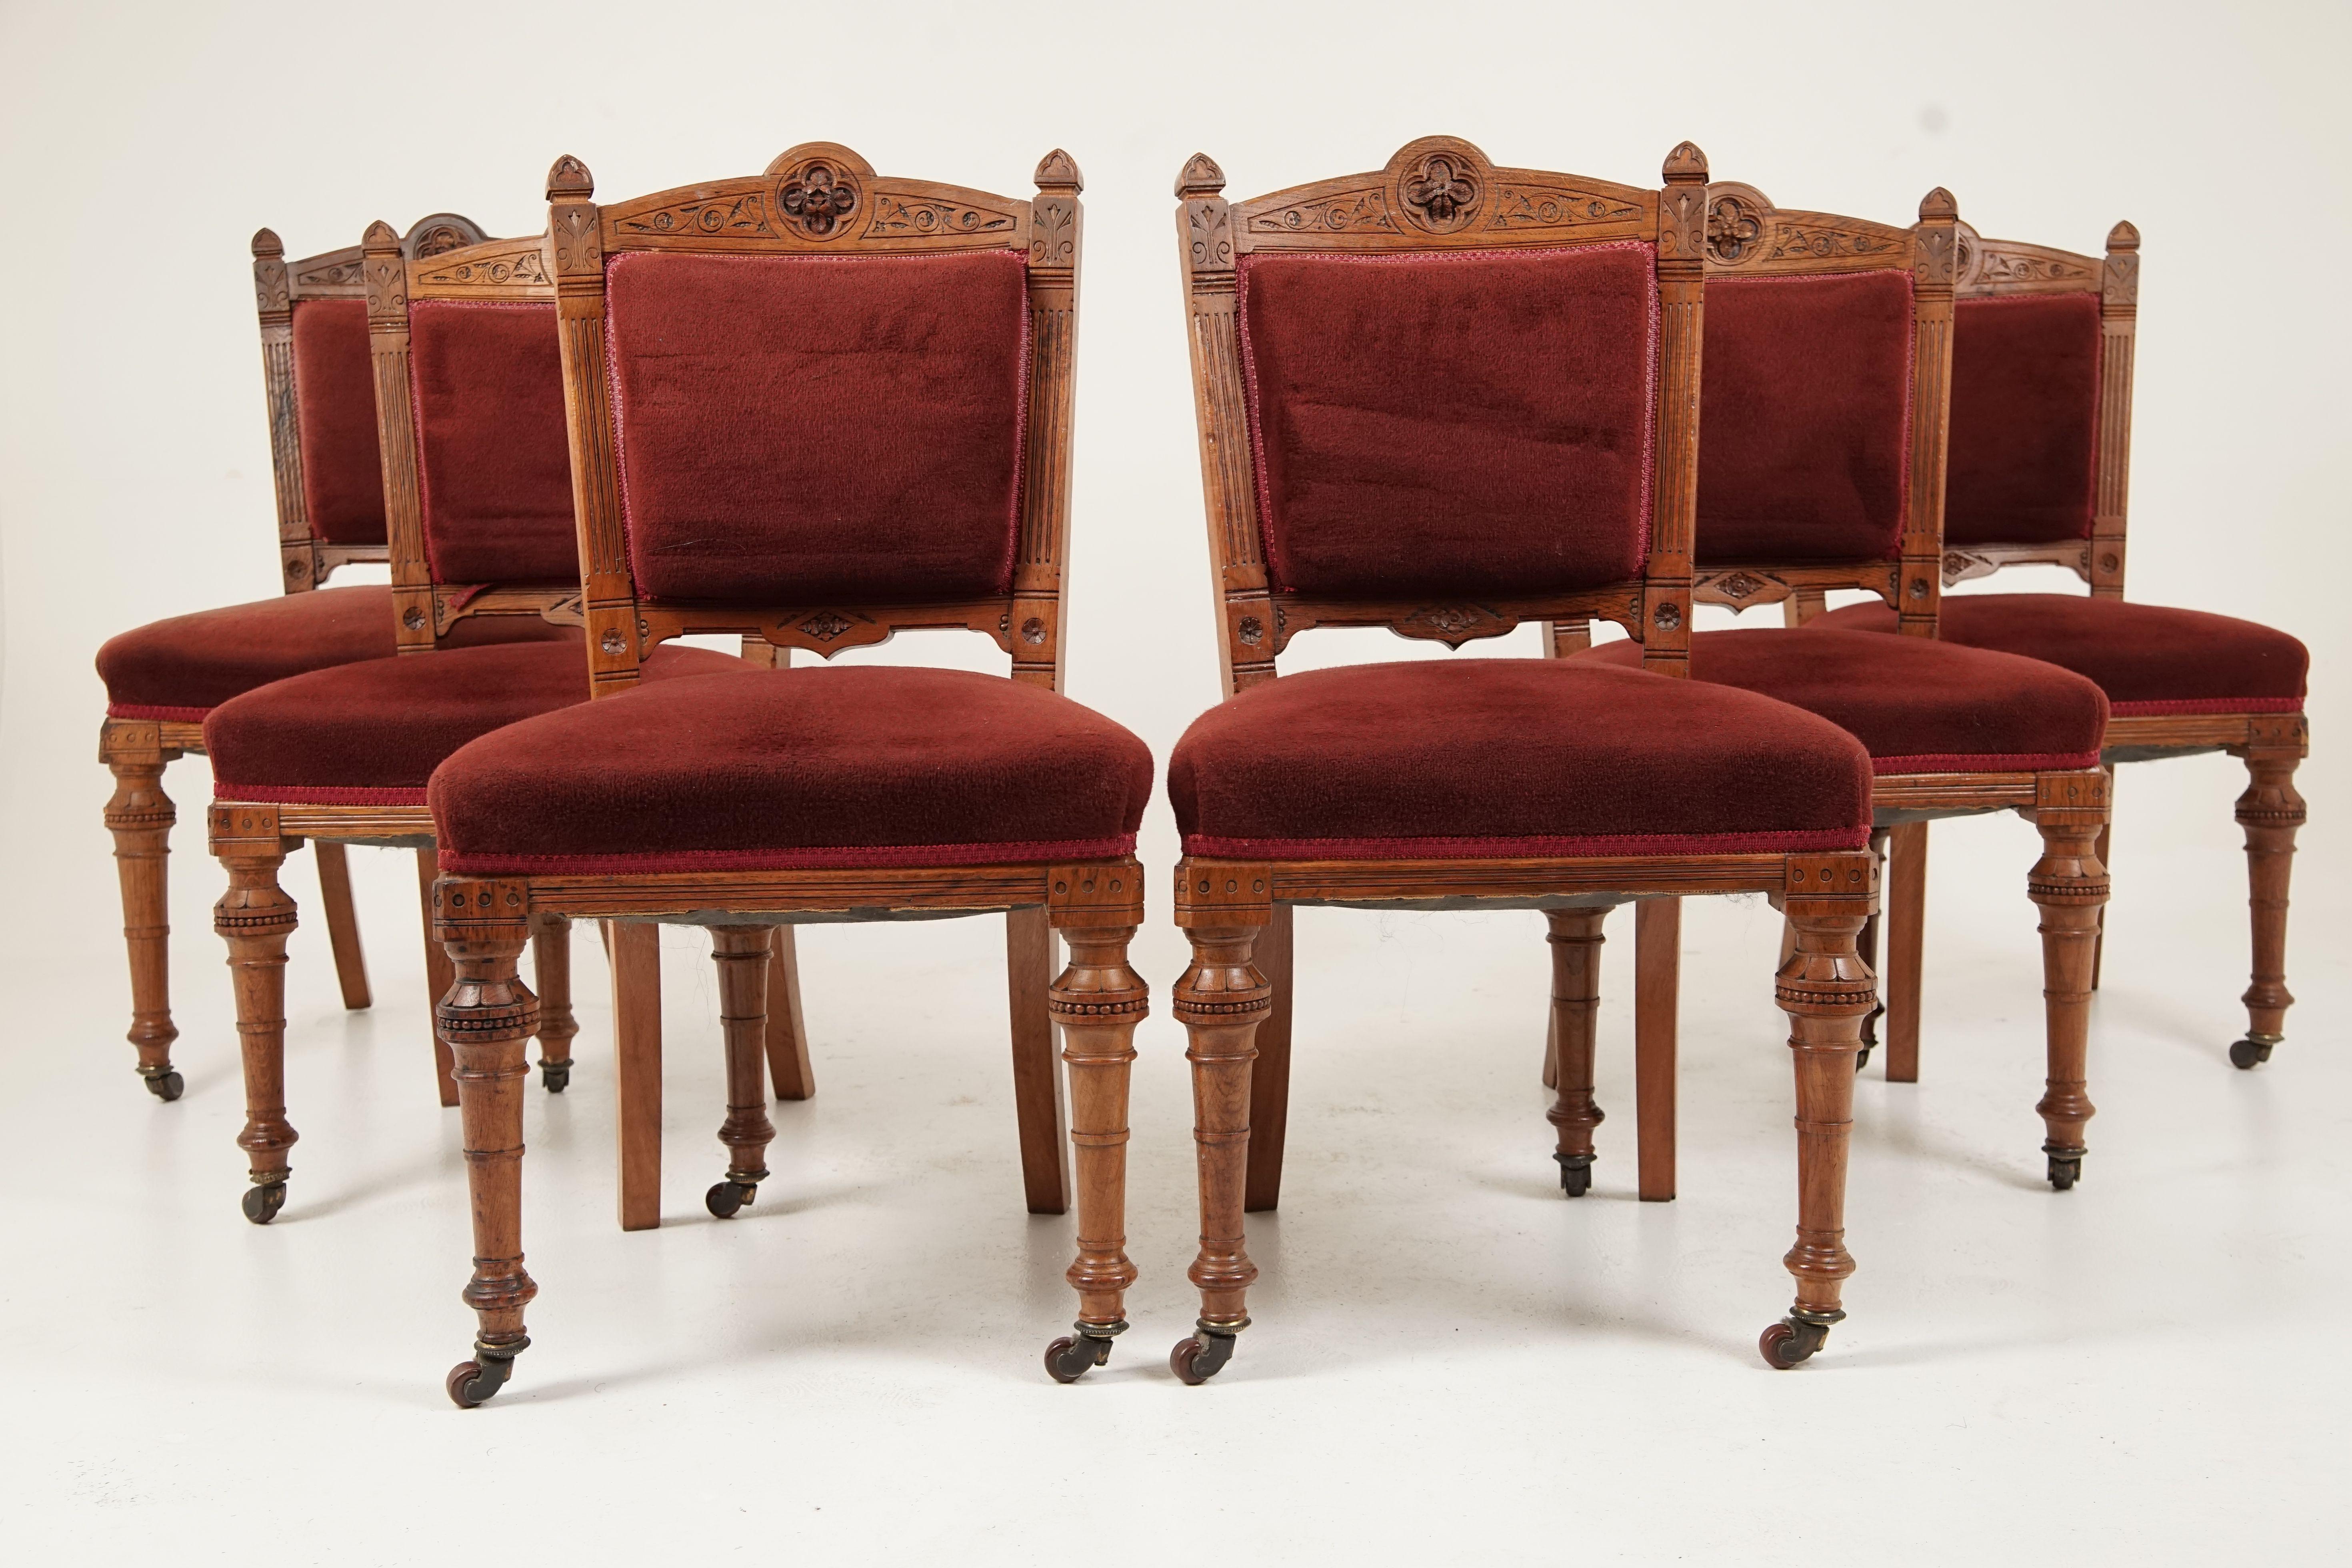 Set of 6 Victorian oak carved upholstered dining chairs, Scotland 1890, B2451

Scotland 1890
Solid oak
Original finish
Beautiful carved top rail with carved supports
Full upholstered back
Upholstered sprung seat
All standing on beautiful